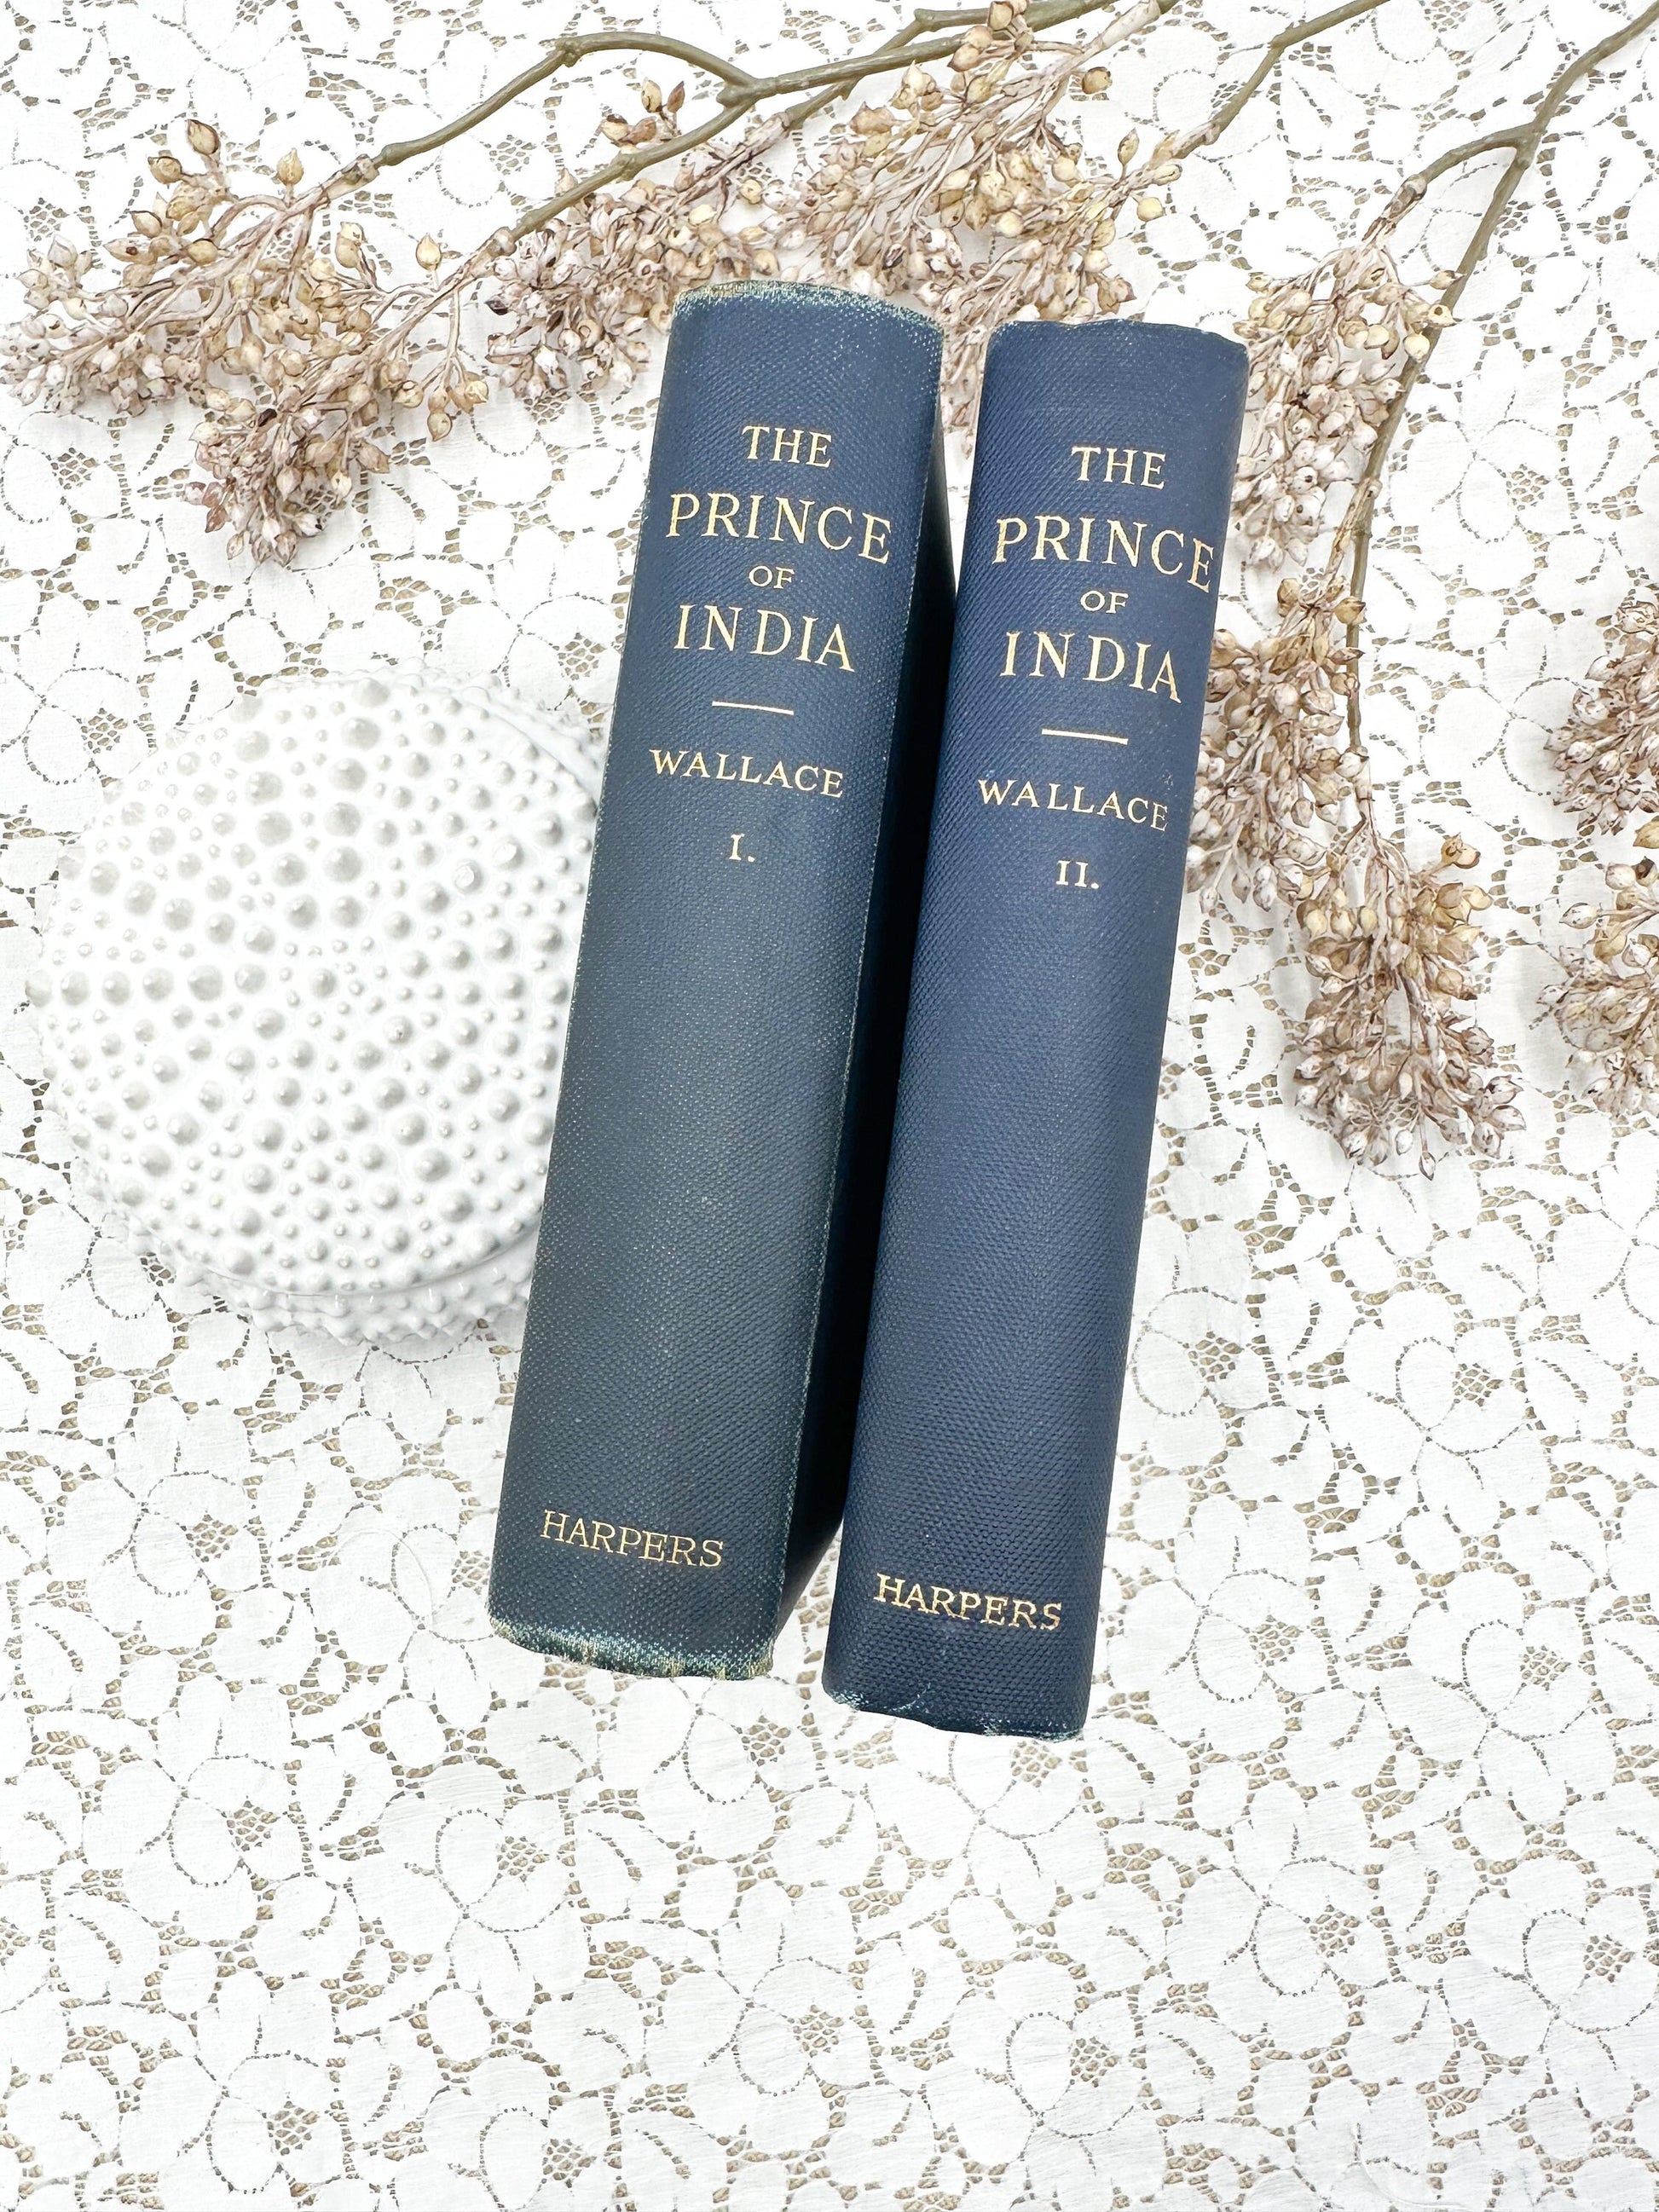 The Prince of India by Lew Wallace (set of 2)